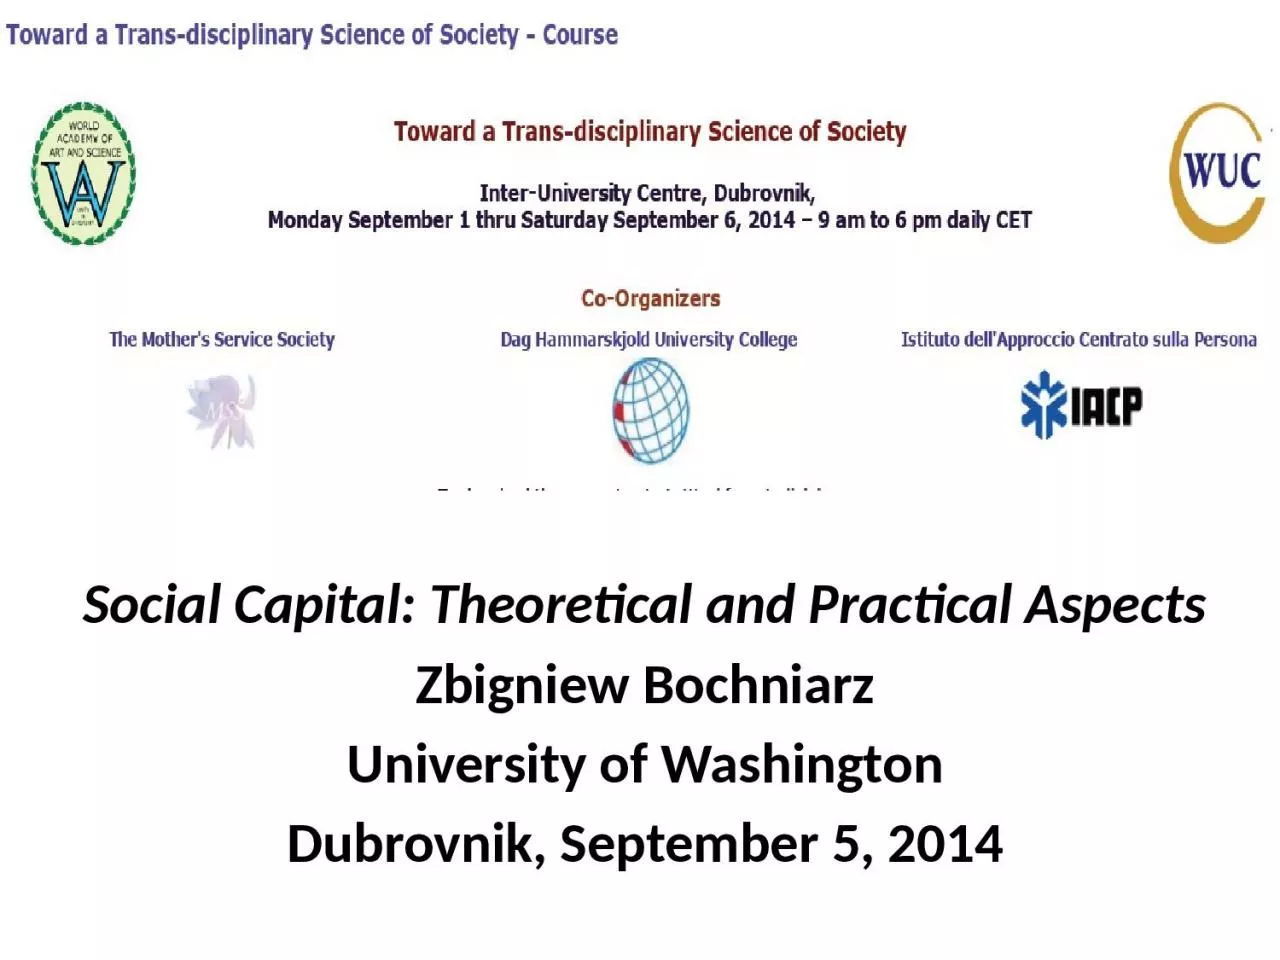 Social Capital: Theoretical and Practical Aspects